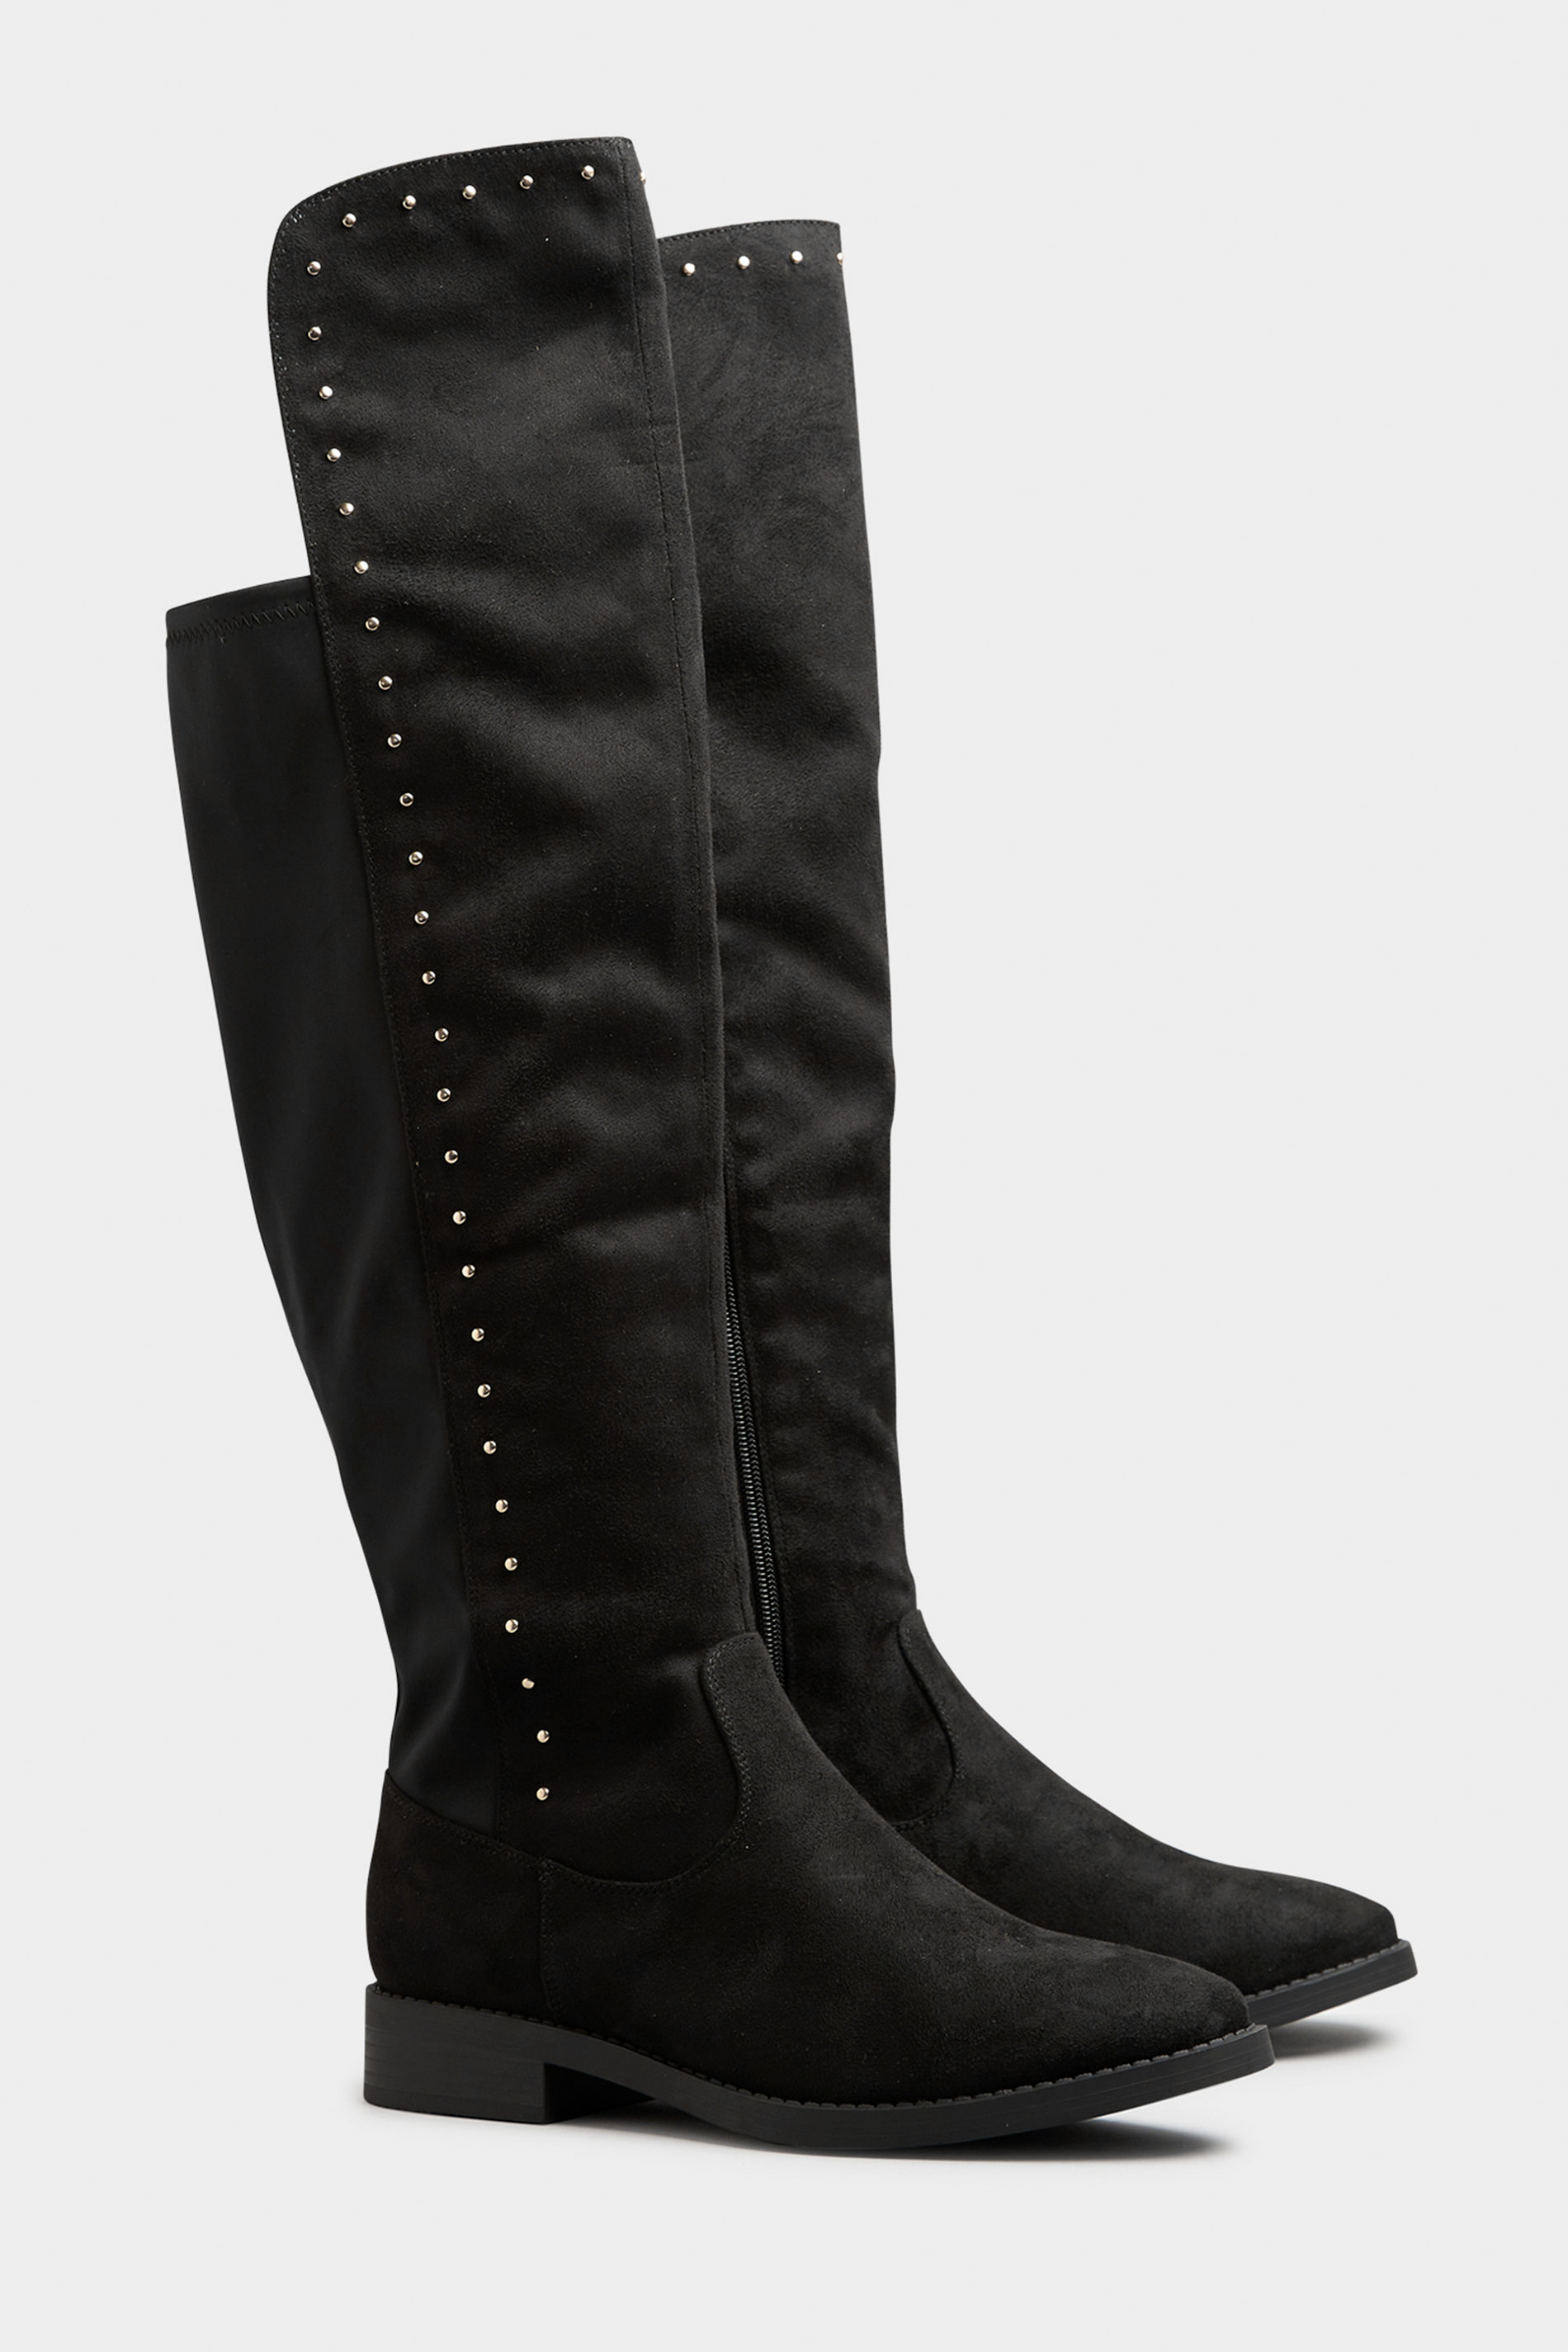 LIMITED COLLECTION Black Stud Over The Knee Boots In Extra Wide Fit_B.jpg